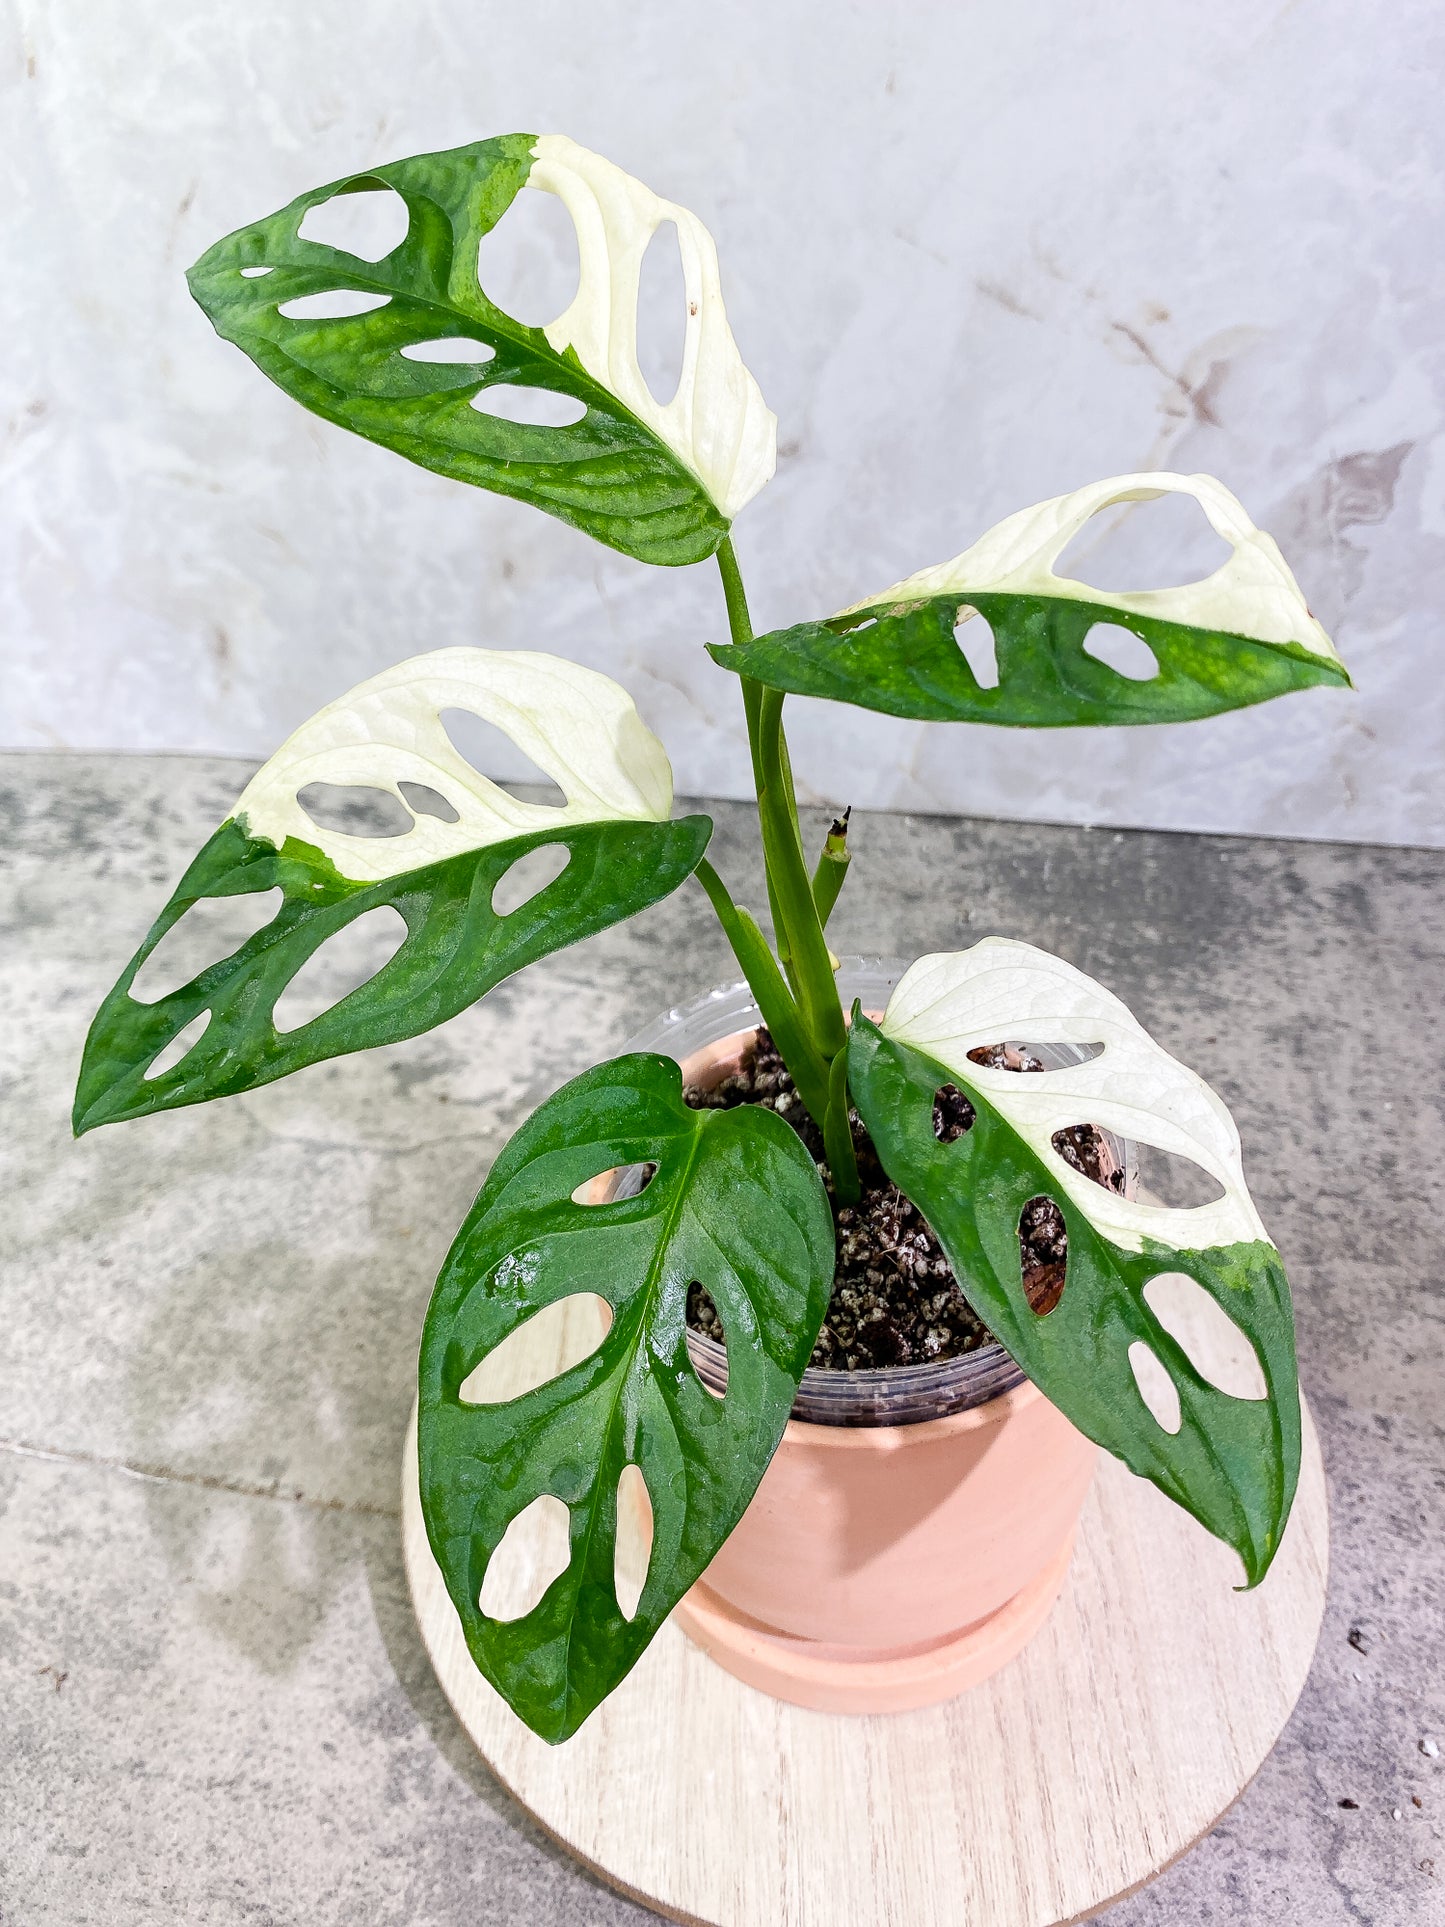 Monstera adansonii albo tricolor Slightly Rooted 2 leaves 2 growing buds